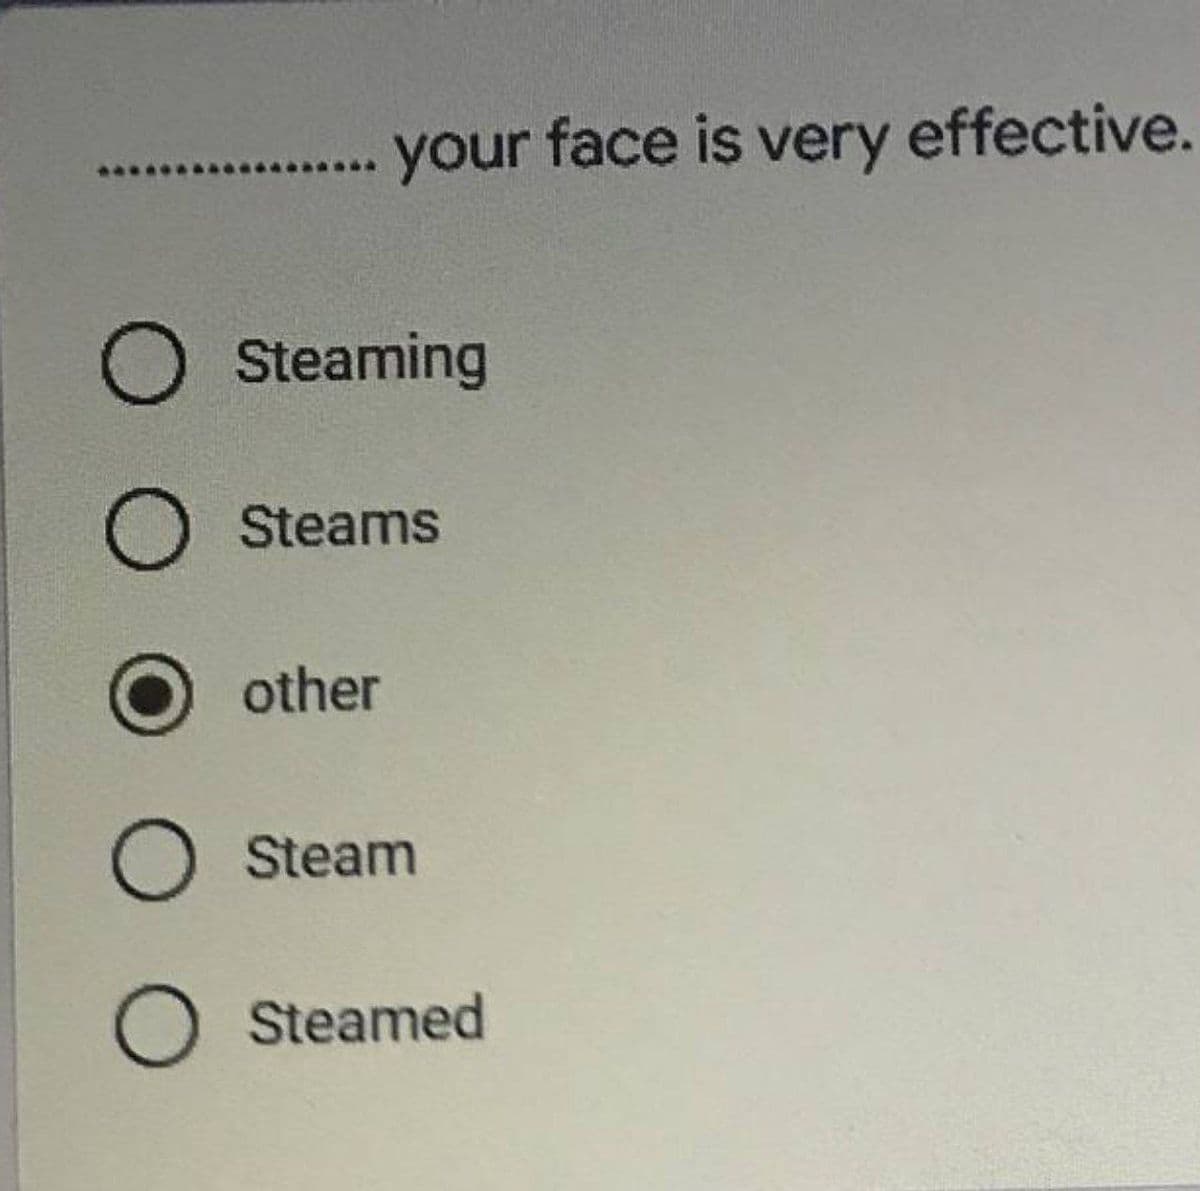 your face is very effective.
O Steaming
O Steams
other
O Steam
O Steamed
